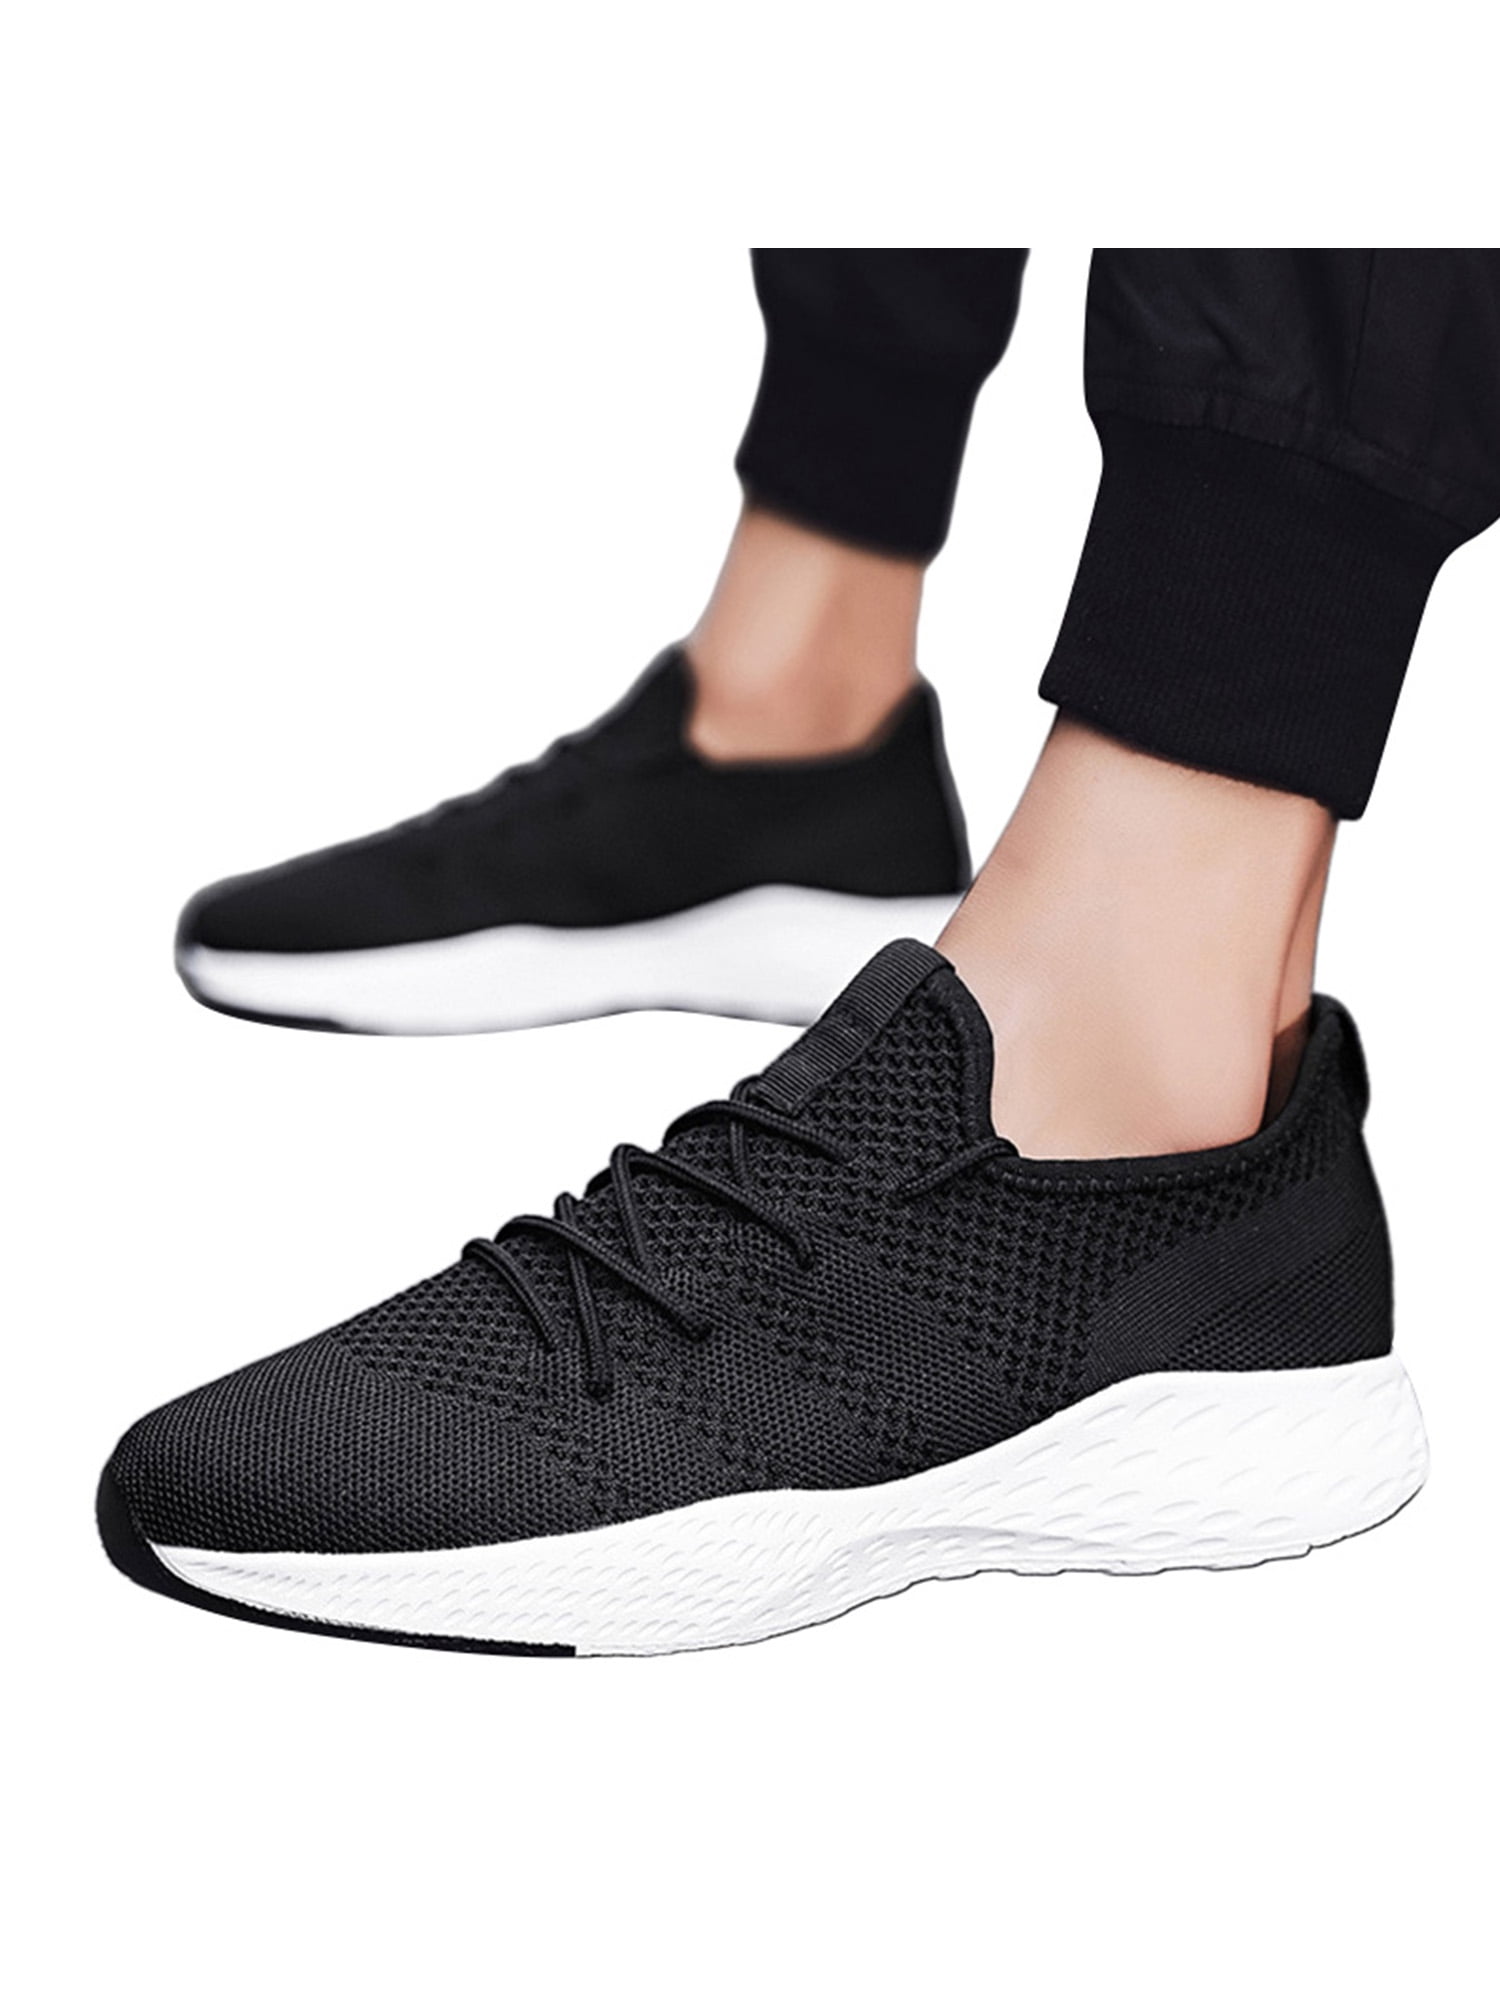 Mens Athletic Sneakers Fashion Breathable Comfortable Casual Running Sport Shoes